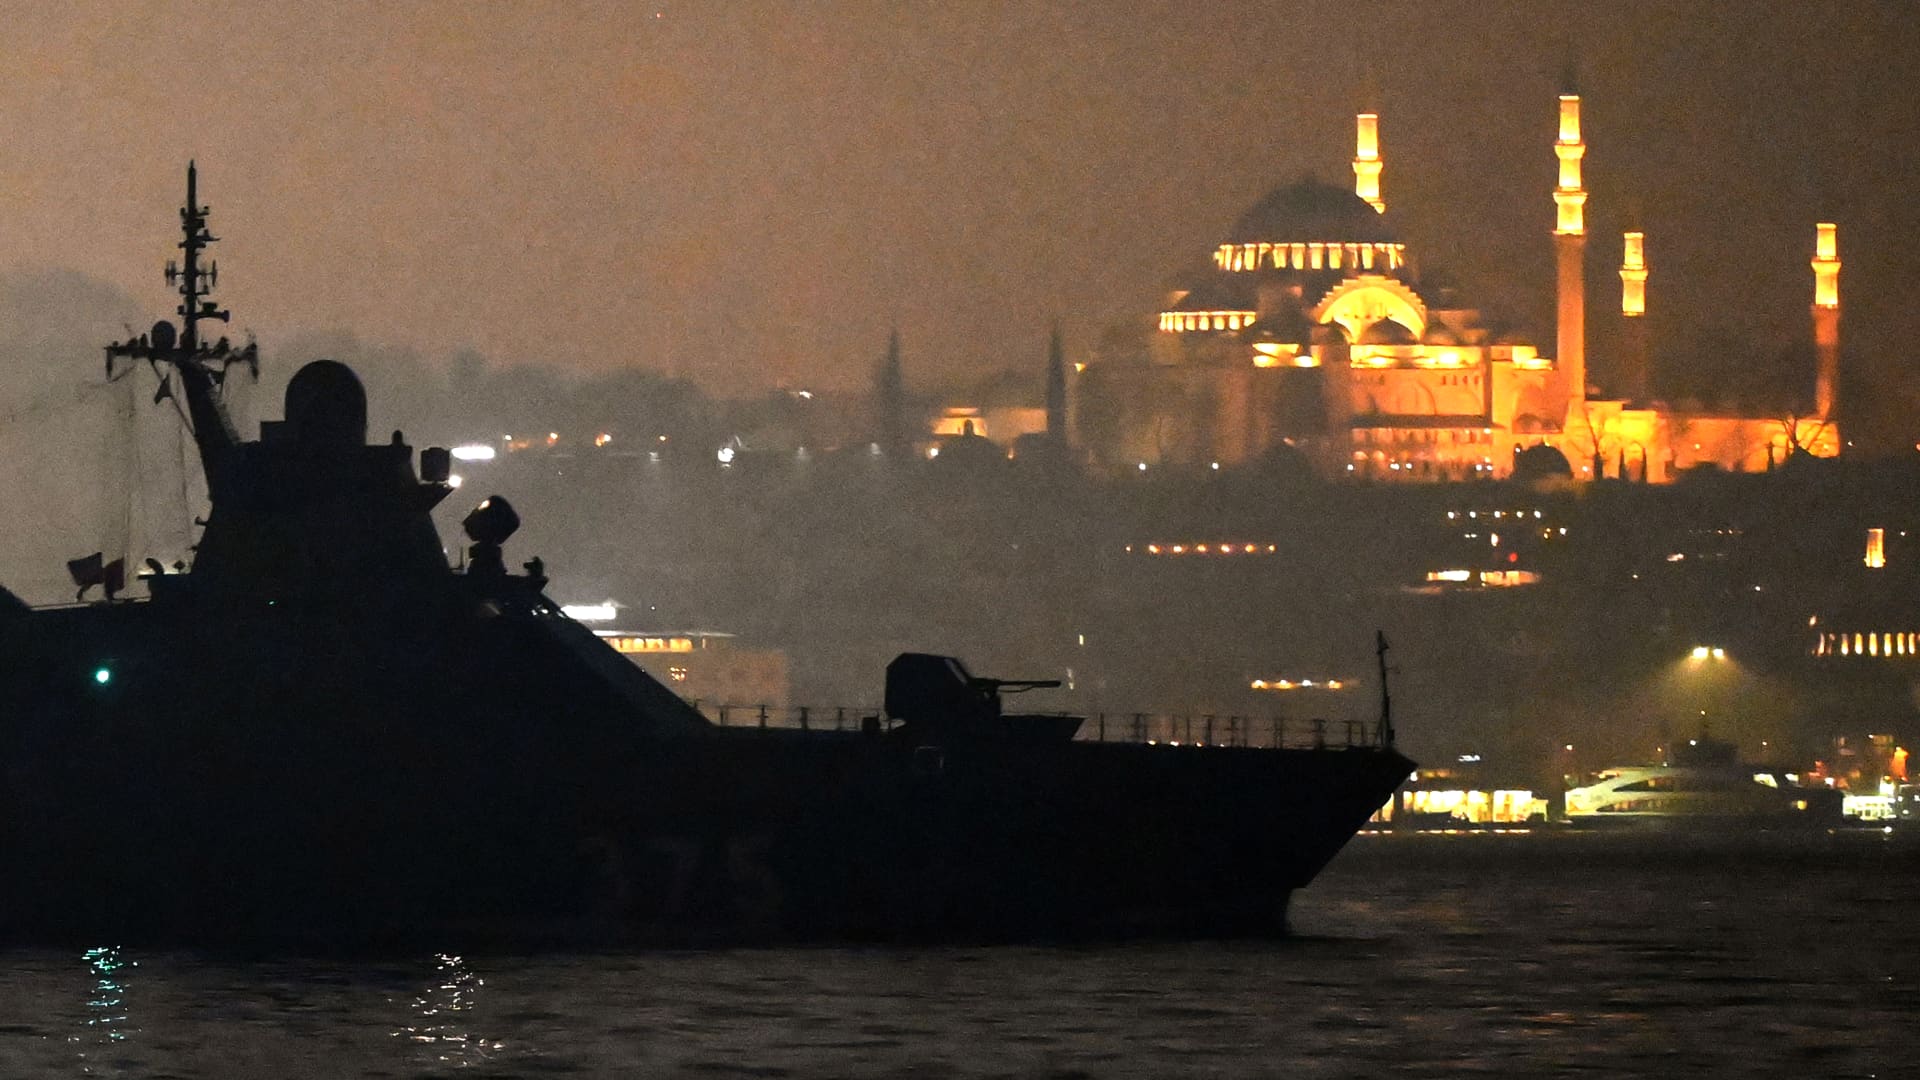 Russian Navy's Project 22160 Patrol Vessel Dmitriy Rogachev 375 sails through the Bosphorus Strait on the way to the Black Sea past the city Istanbul as Suleymaniye mosque is seen in the backround on February 16, 2022.